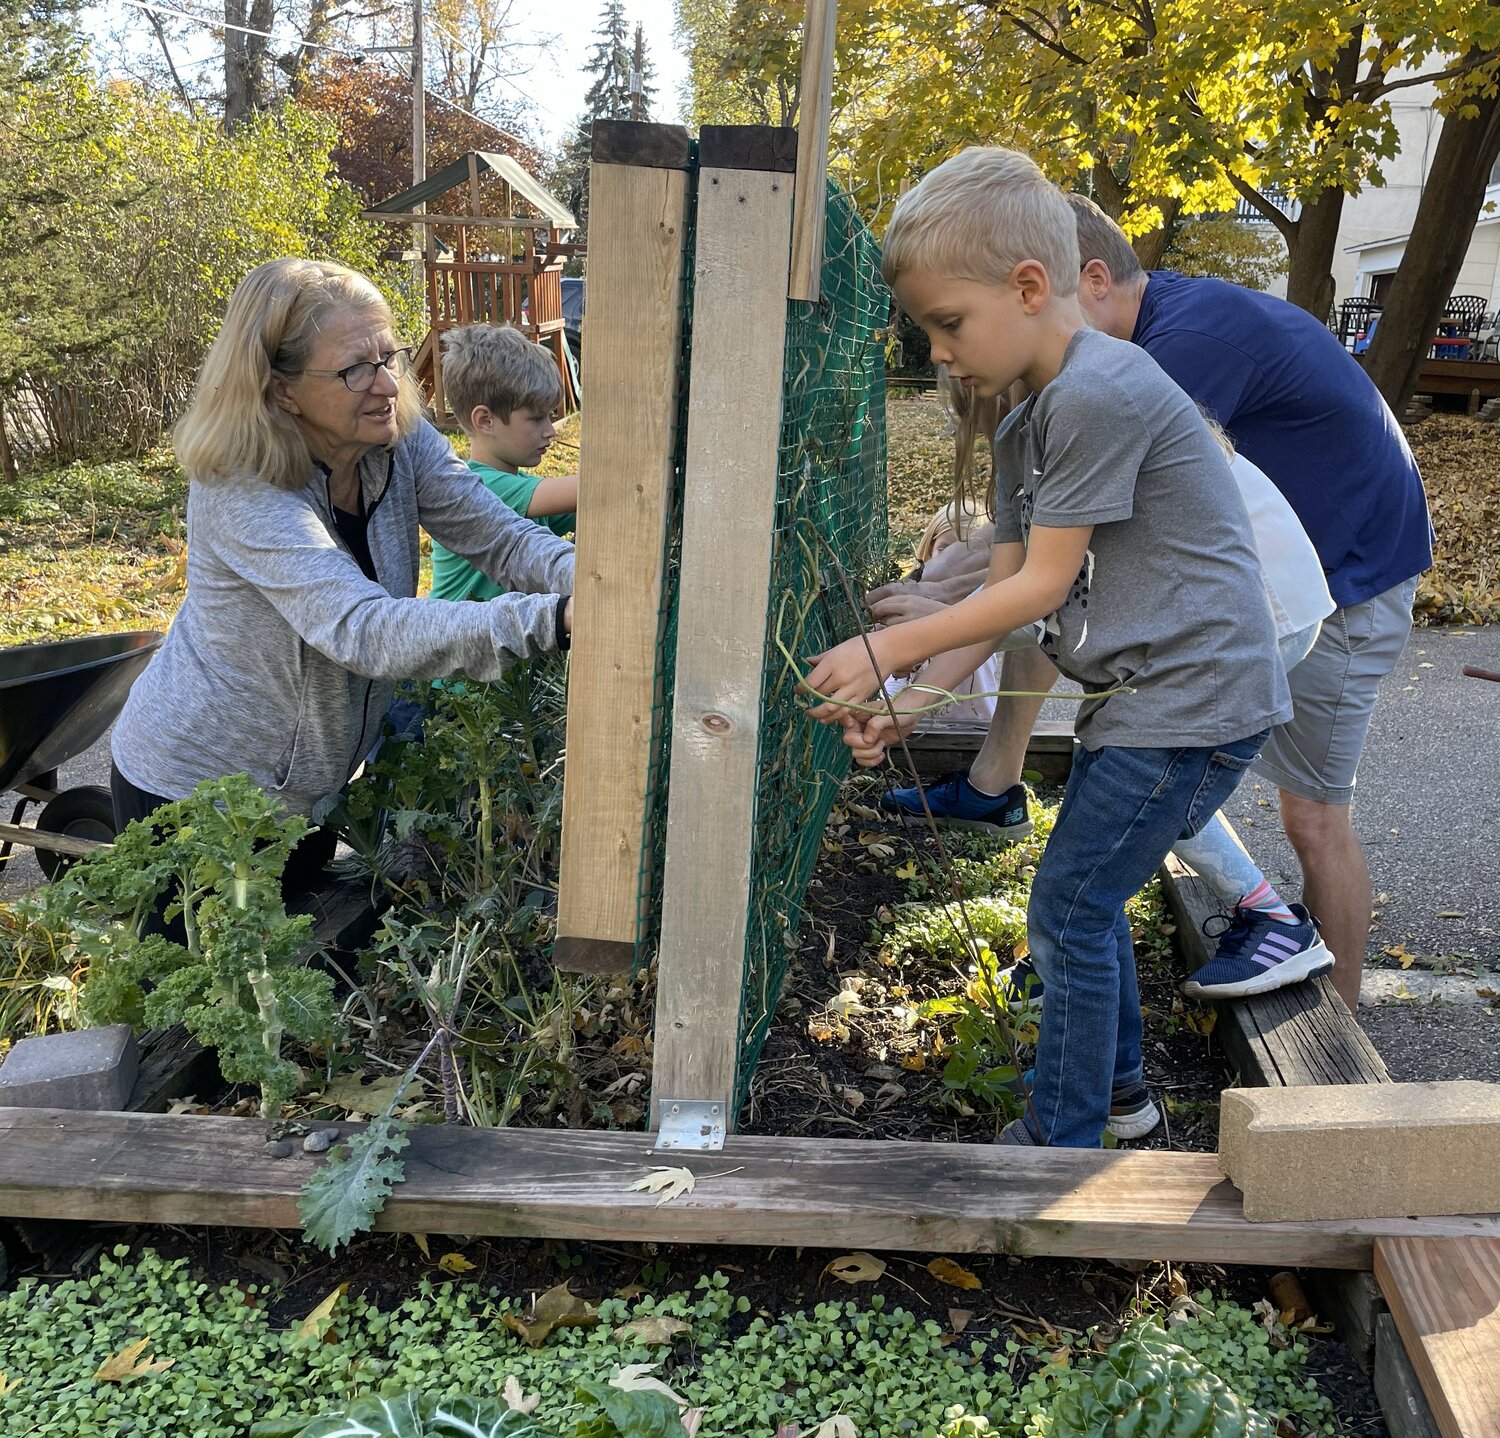 Patricia Neal works with children to tend their neighborhood sponsored garden.